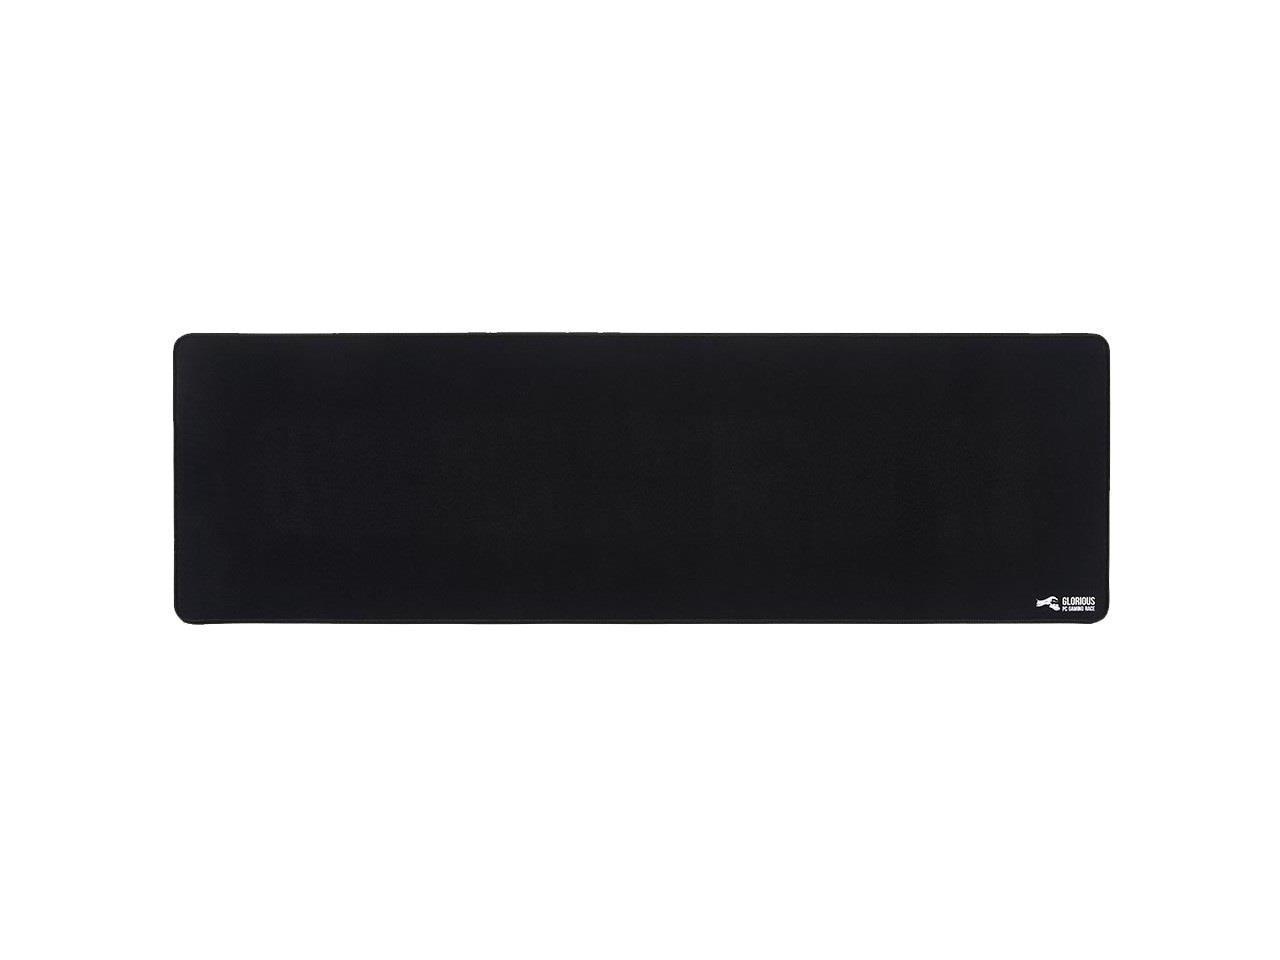 Glorious Extended Gaming Mouse Mat / Pad - XXL Large, Wide (Long) Black ...